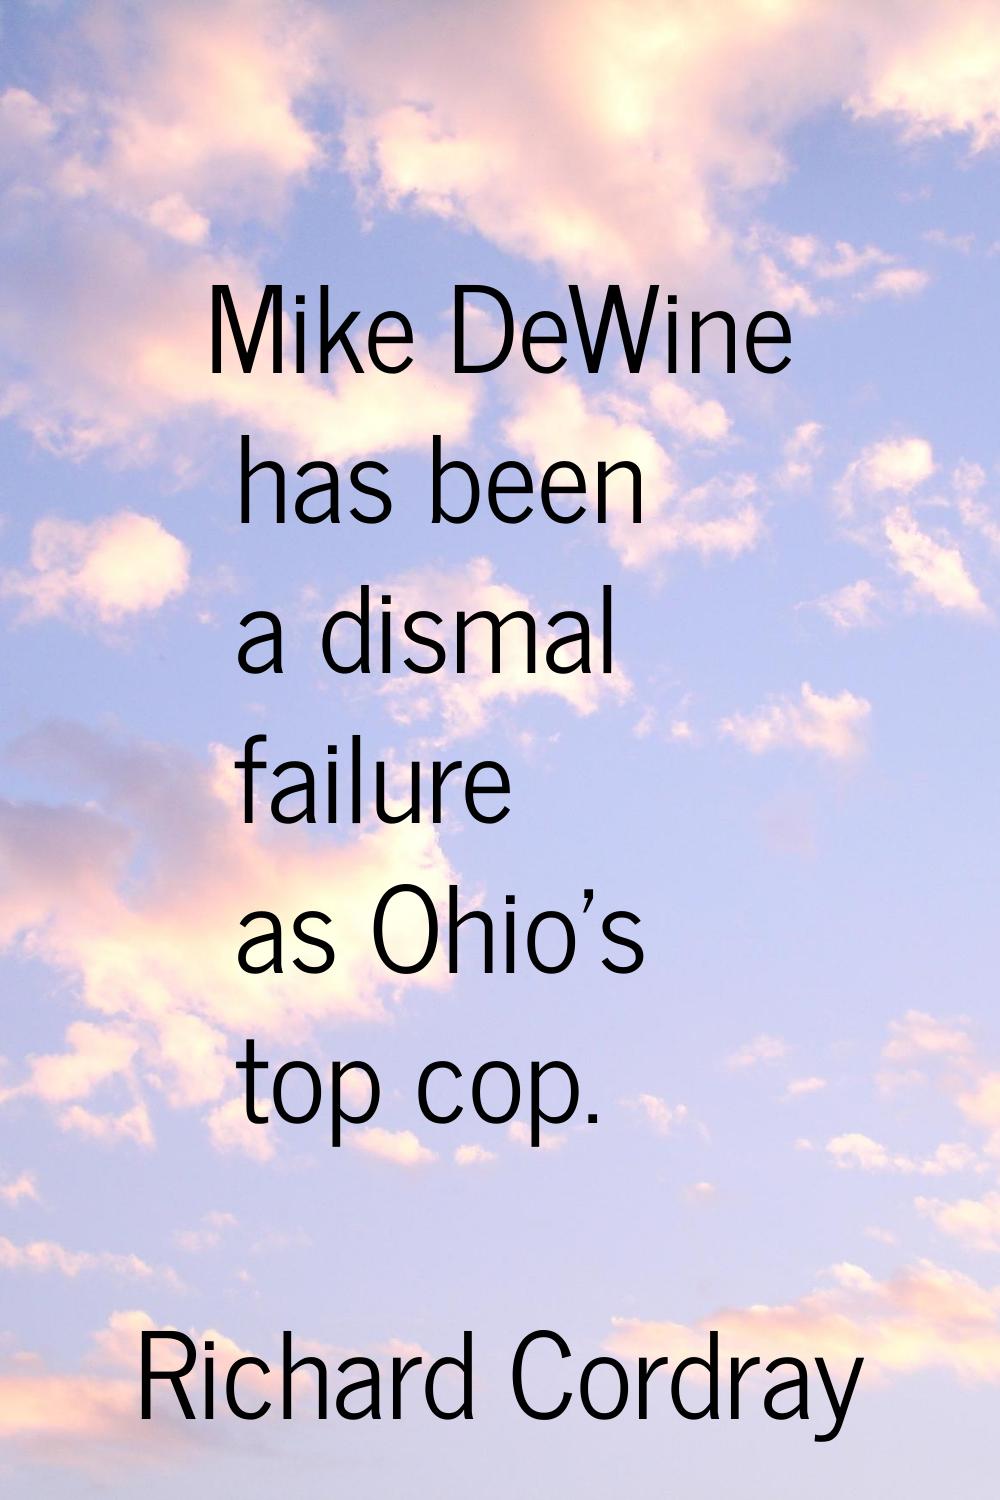 Mike DeWine has been a dismal failure as Ohio's top cop.